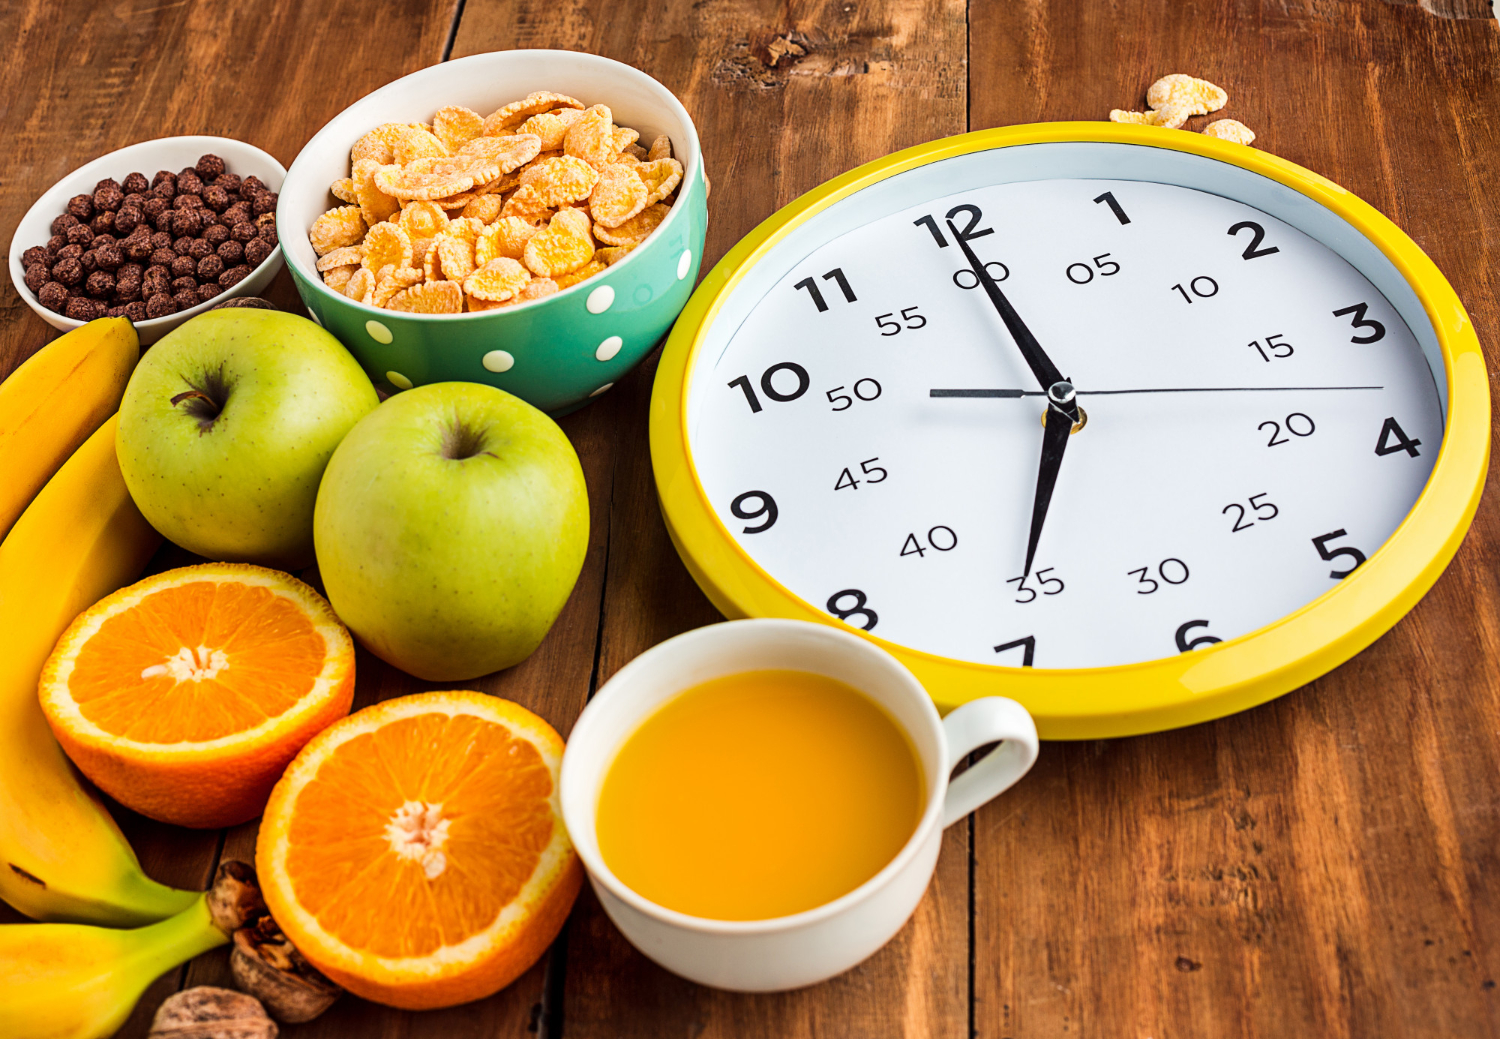 Irregular Meal Times Affect Physical and Mental Health